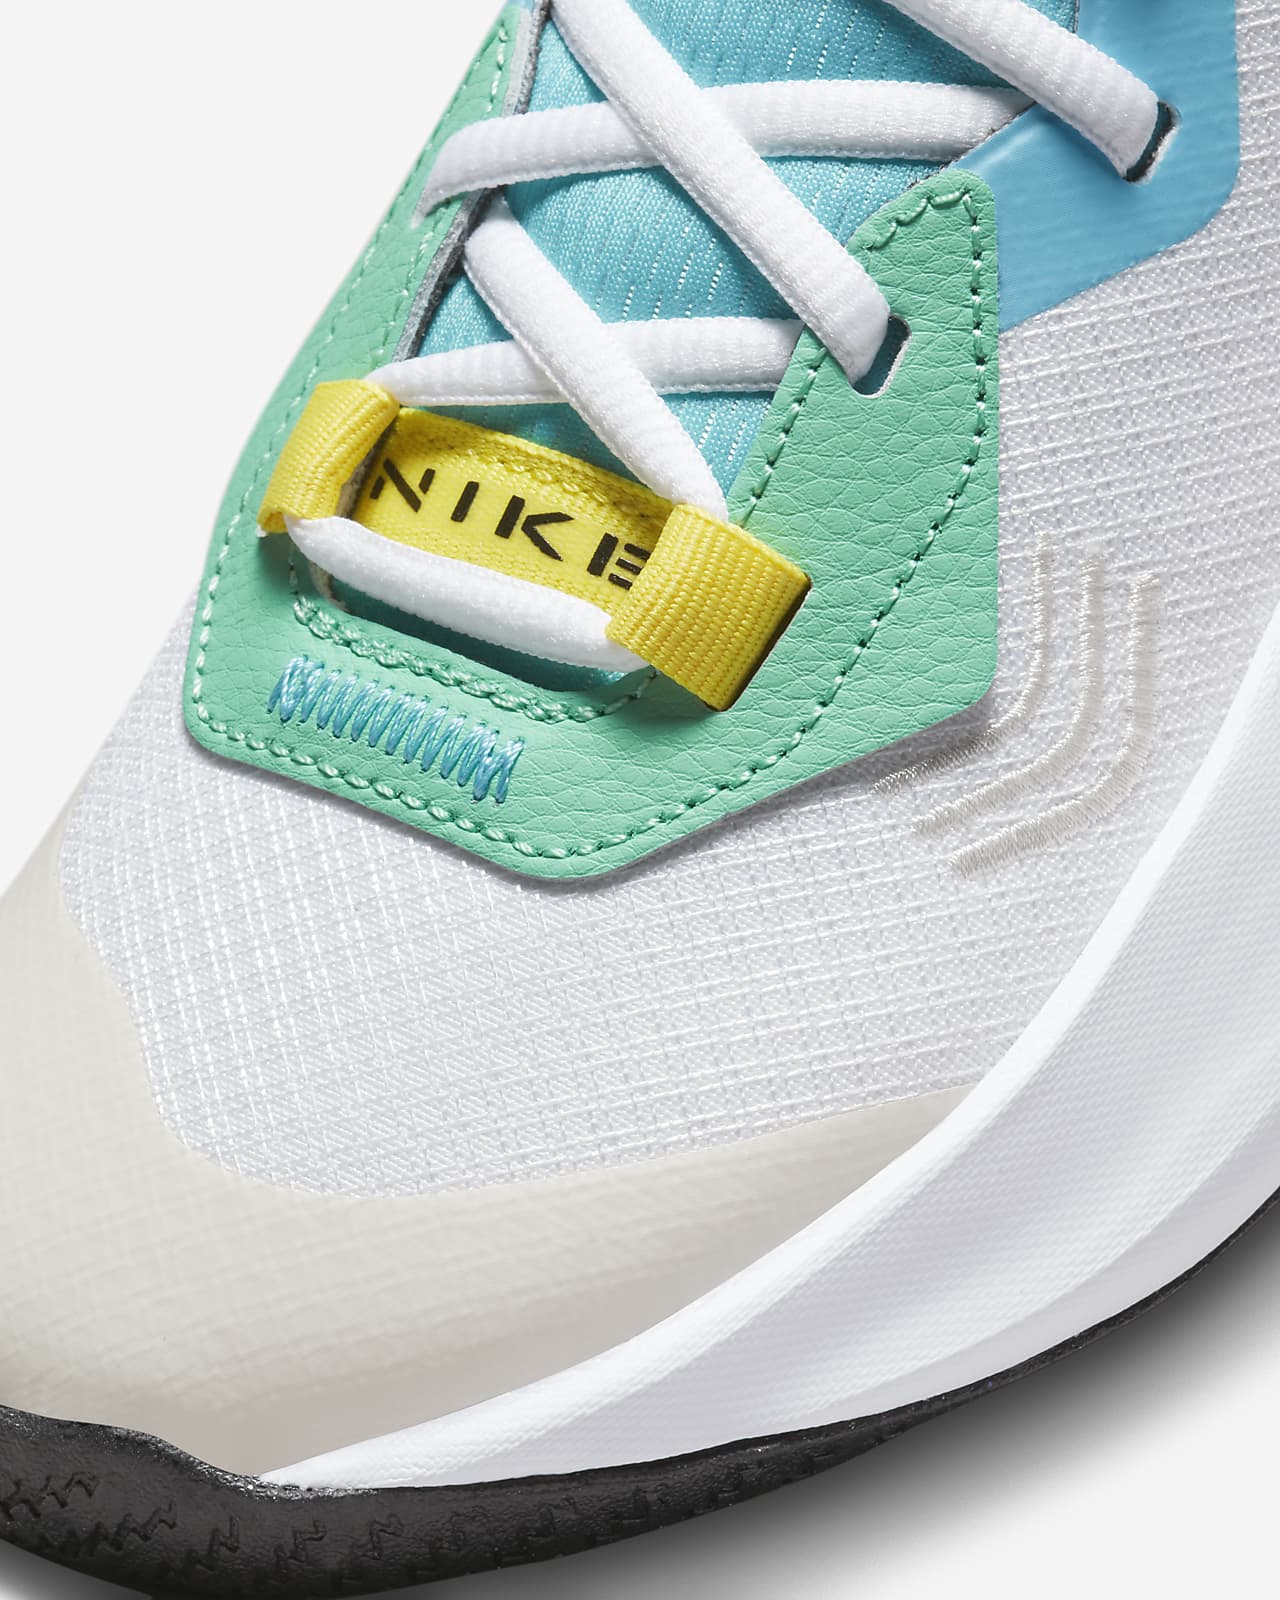 Nike Big Kids' Air Zoom Crossover Basketball Shoes